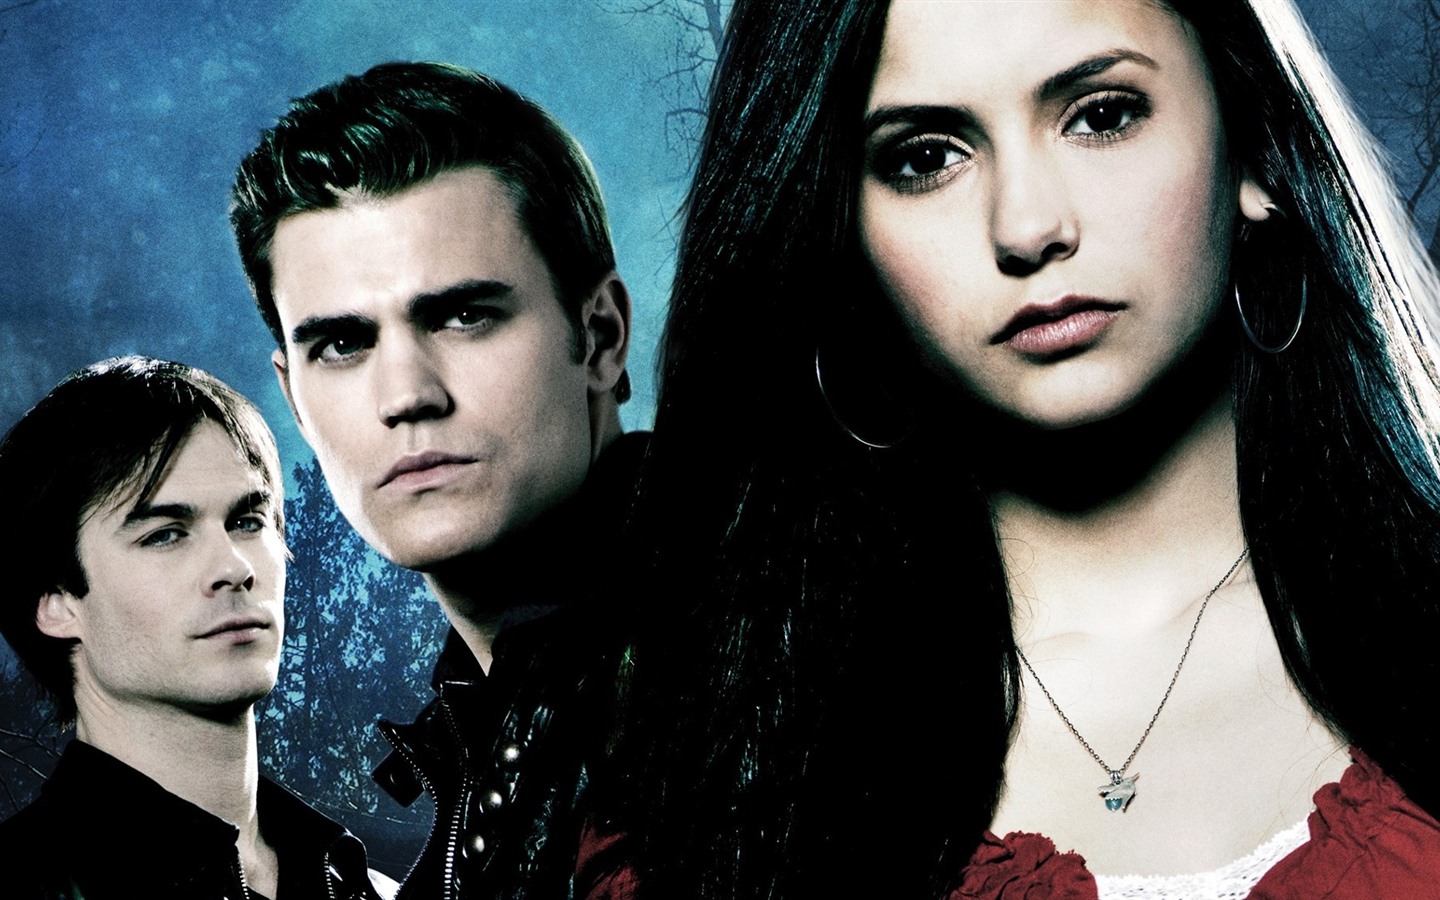 The Vampire Diaries wallpapers HD #7 - 1440x900